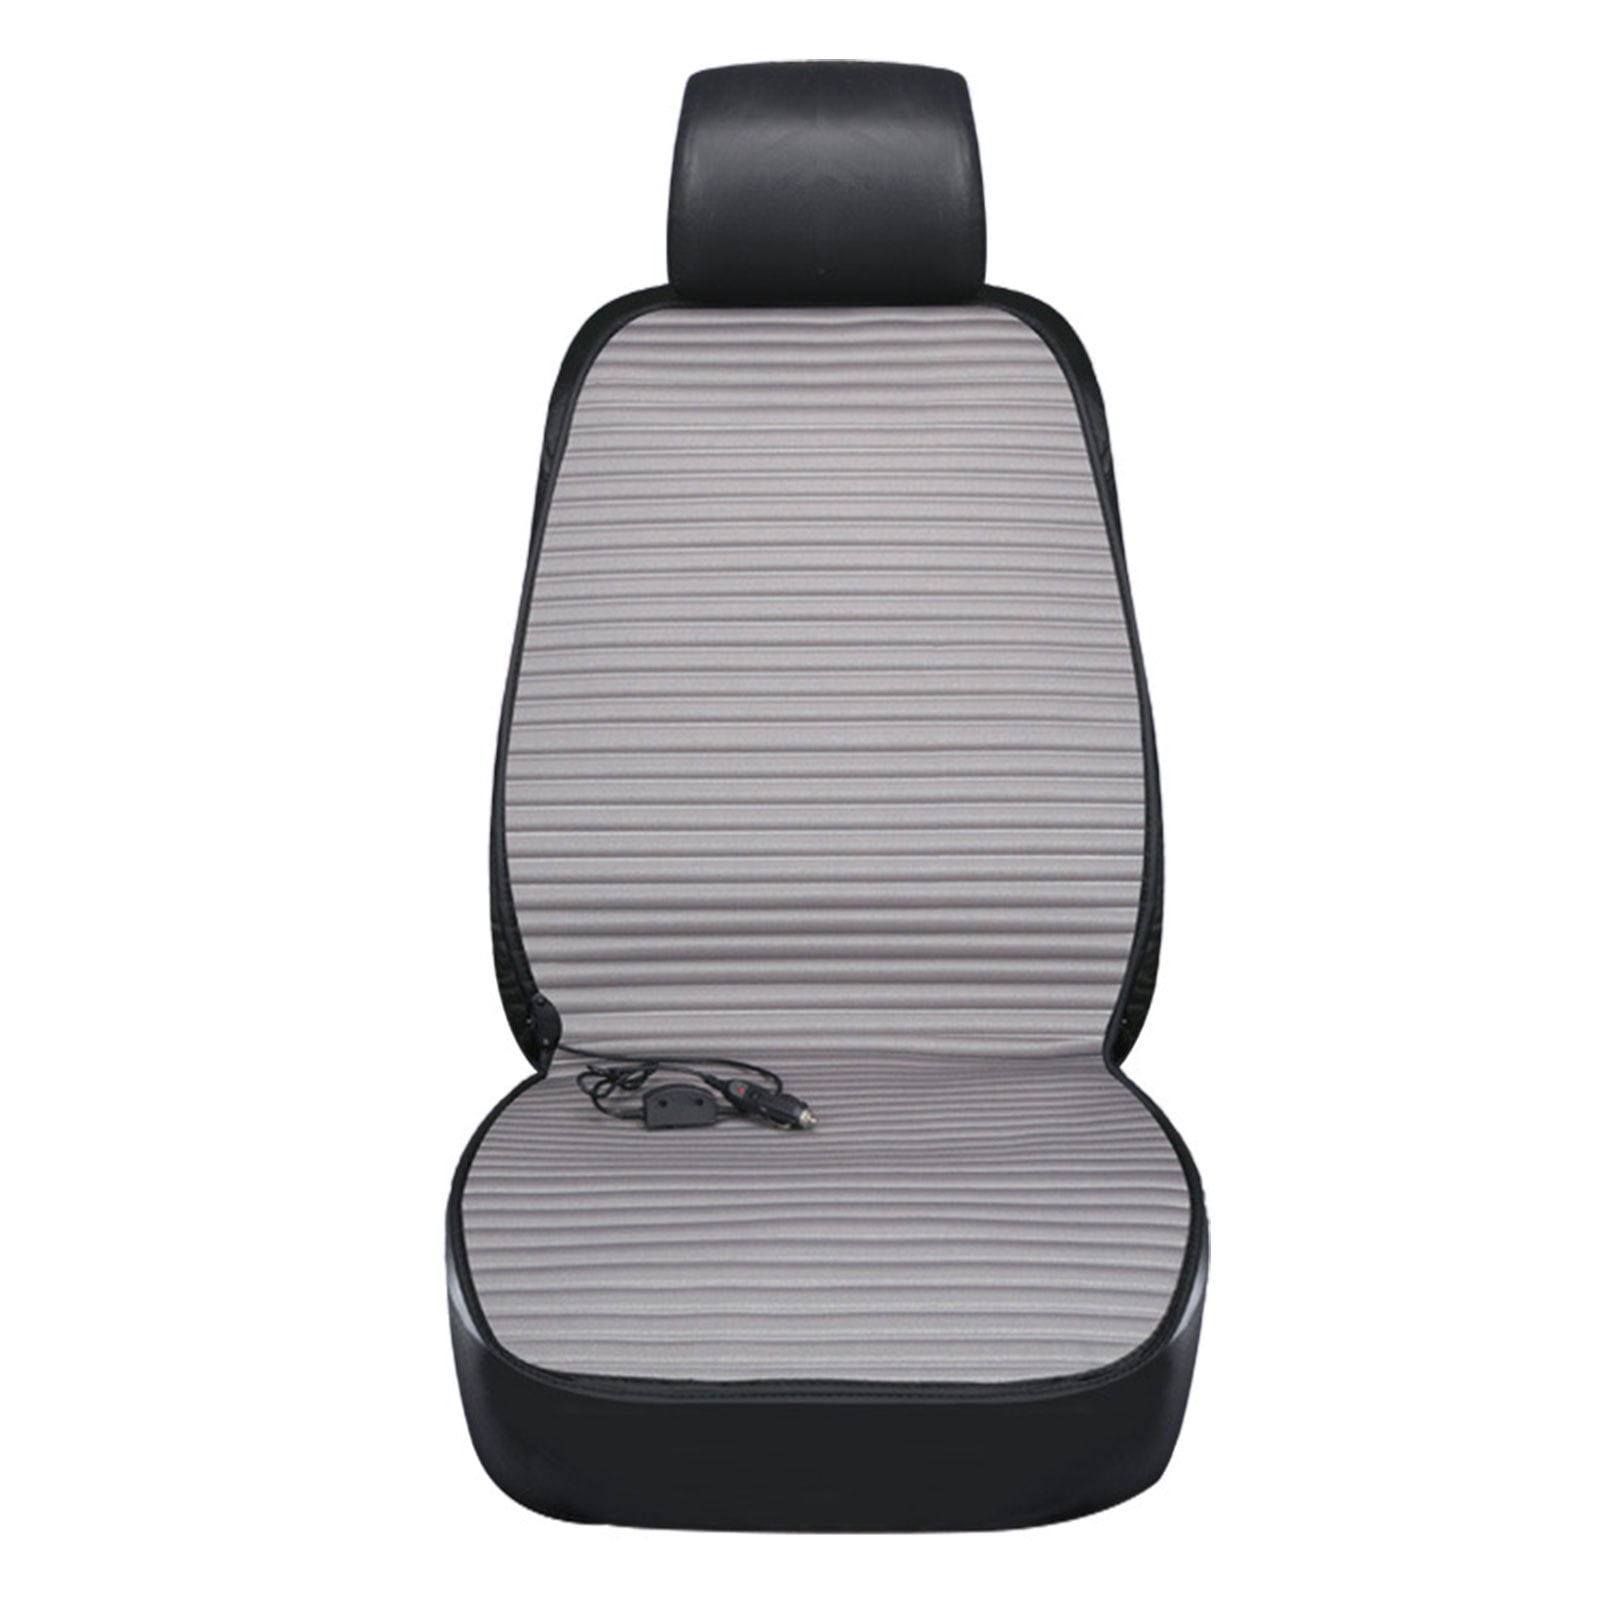 Lacyie Car Booster Seat Cushion Portable Car Seat Pad for Office Home 